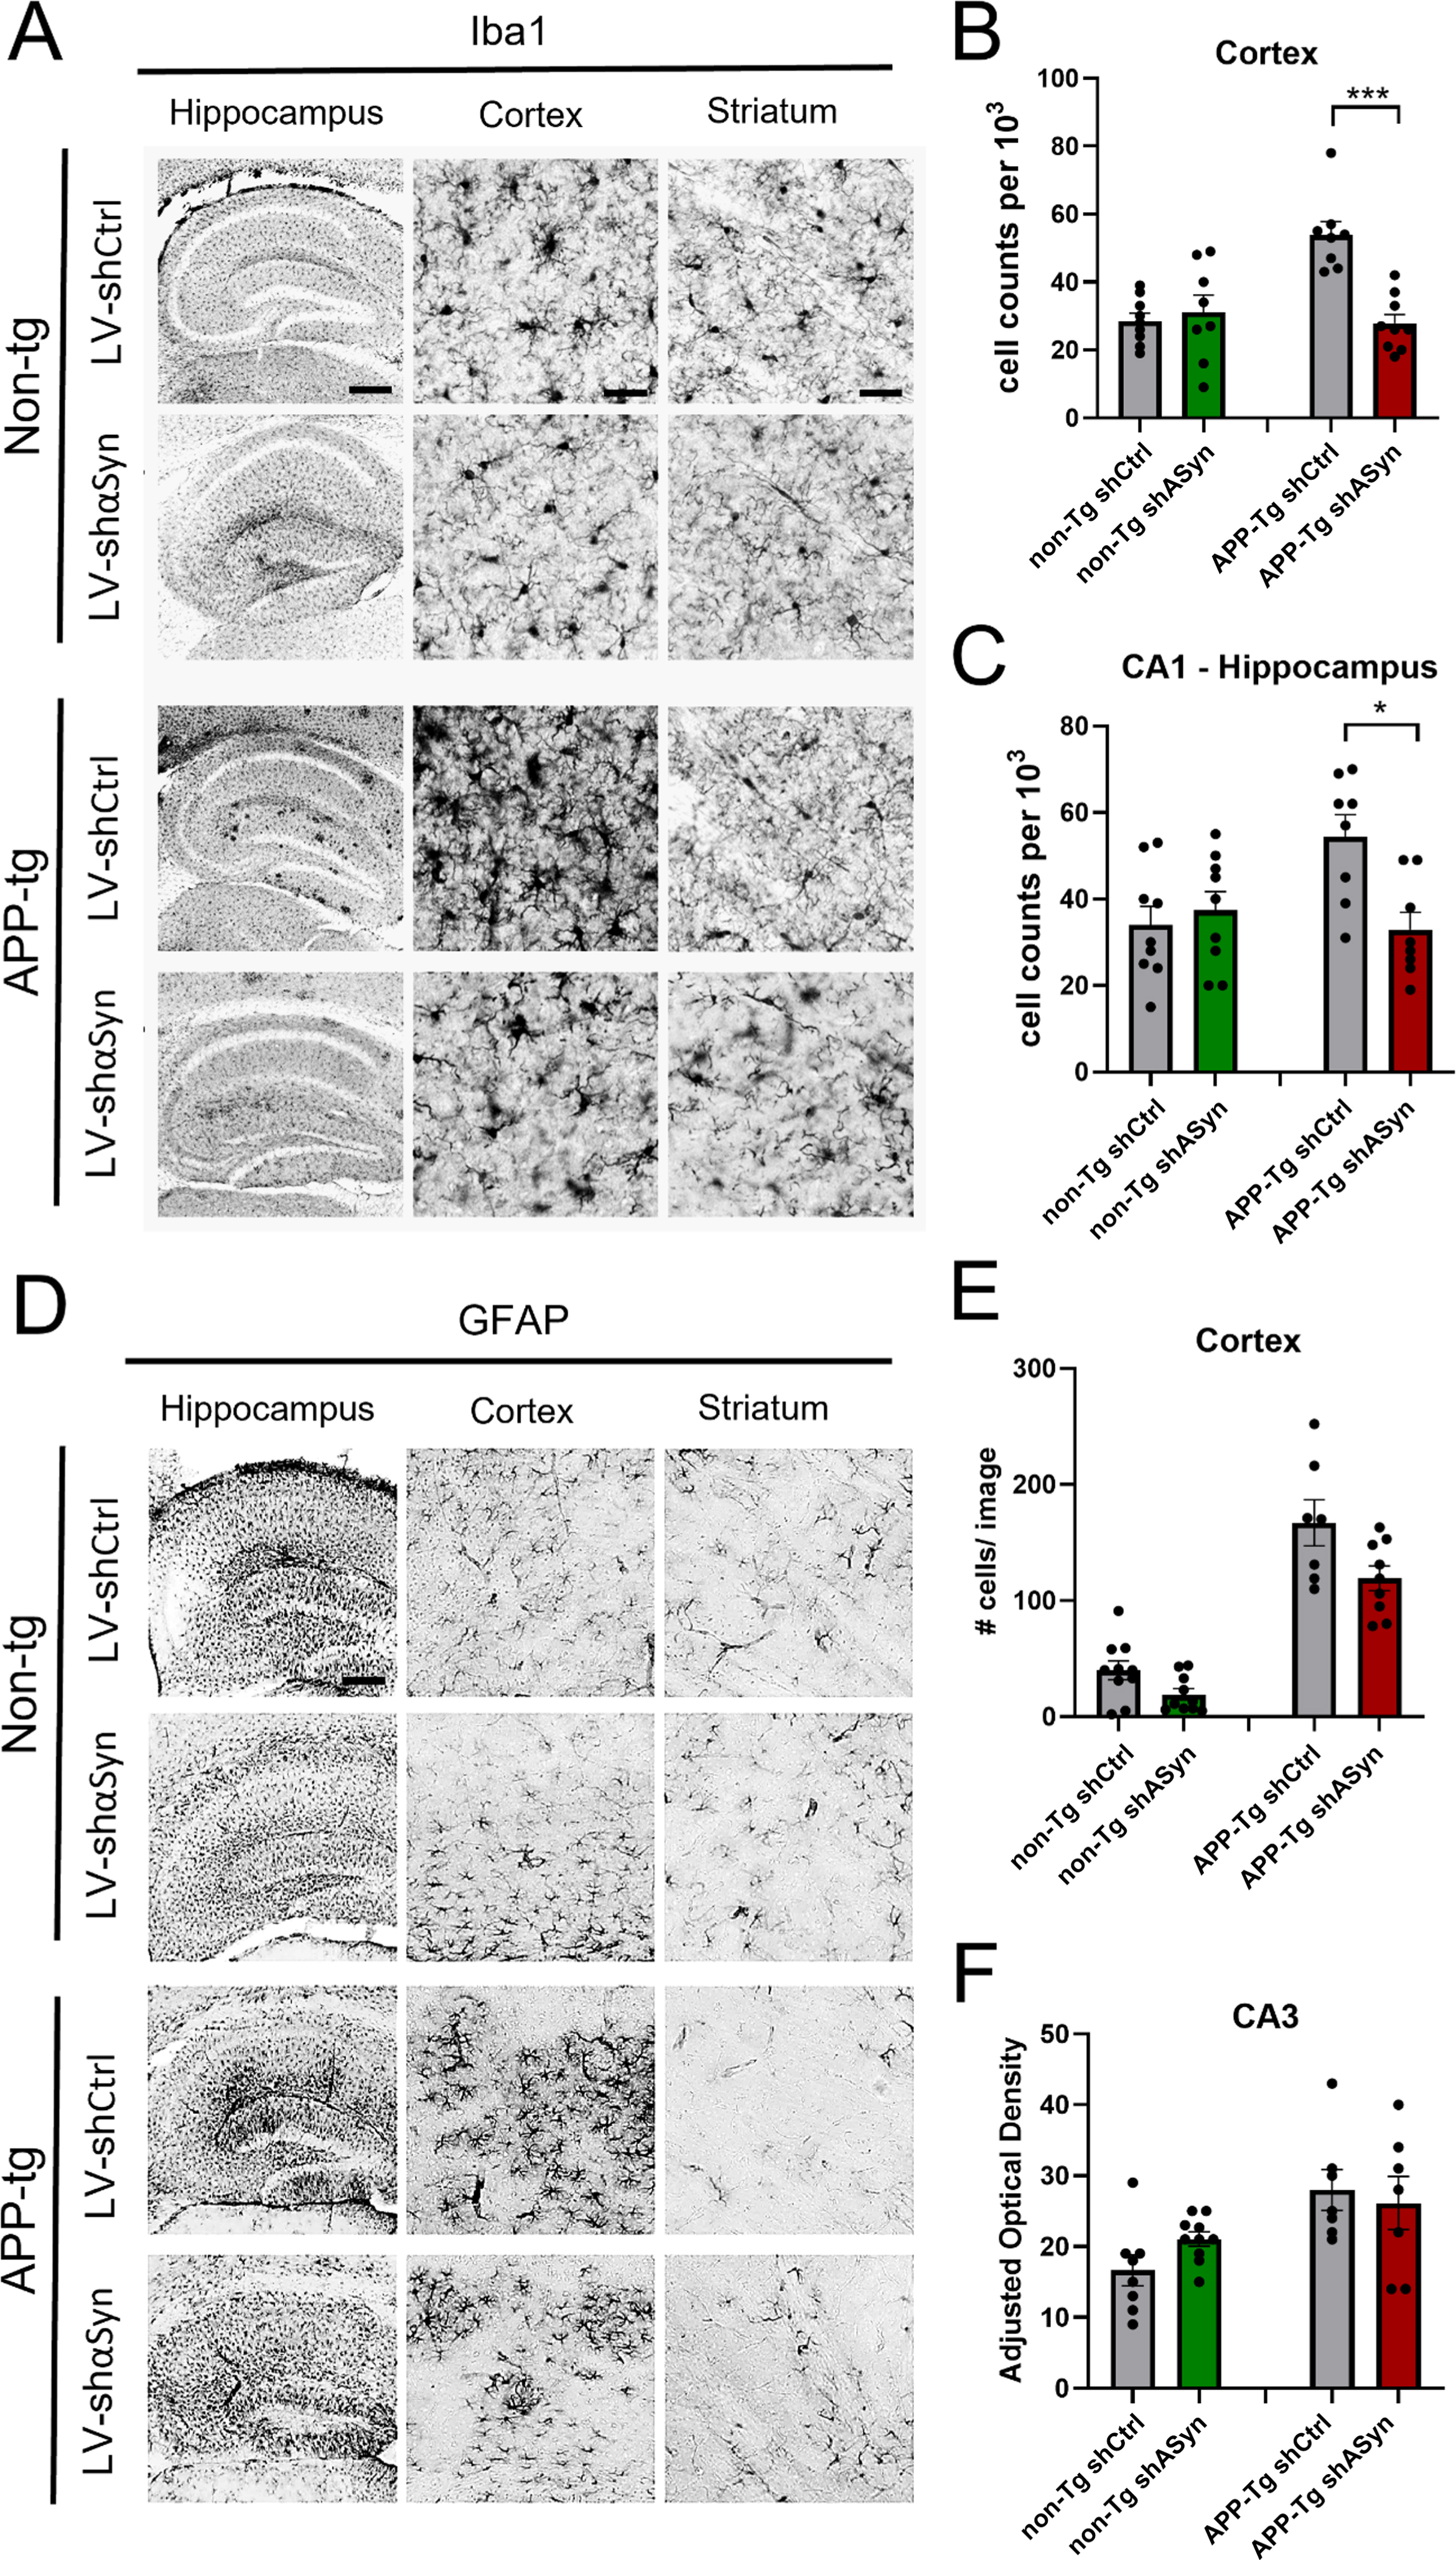 Immunohistochemical analysis of changes in microglial (Iba1) and astrocytic activation (GFAP) in non-Tg and APP-Tg mice treated with LV-shα-syn as compared to LV-shCtrl. A, D) Representative low- and high-magnification photomicrographs of the frontal cortex, CA3, and CA1 regions of the hippocampus –Iba1 and GFAP immunostains respectively. B, C) Quantification of anti-Iba1 immunostains for cell counts/103 mm in the hippocampus (CA3), cortex and striatum, showing a statistically significant lower number of Iba1-positive cells in the cortex of APP-Tg mice treated with LV-shα-syn as compared with LV-shCtrl. E, F) Quantification of GFAP-positive signal using adjusted optical density in the CA3 and cell counts per 103 mm in the cortex and striatum. Statistical analysis was conducted using one-way ANOVA post hoc Dunnett’s test *p < 0.05, ***p < 0.001. Scale bars, 100μm in low-power images and 40μm in high-power images.